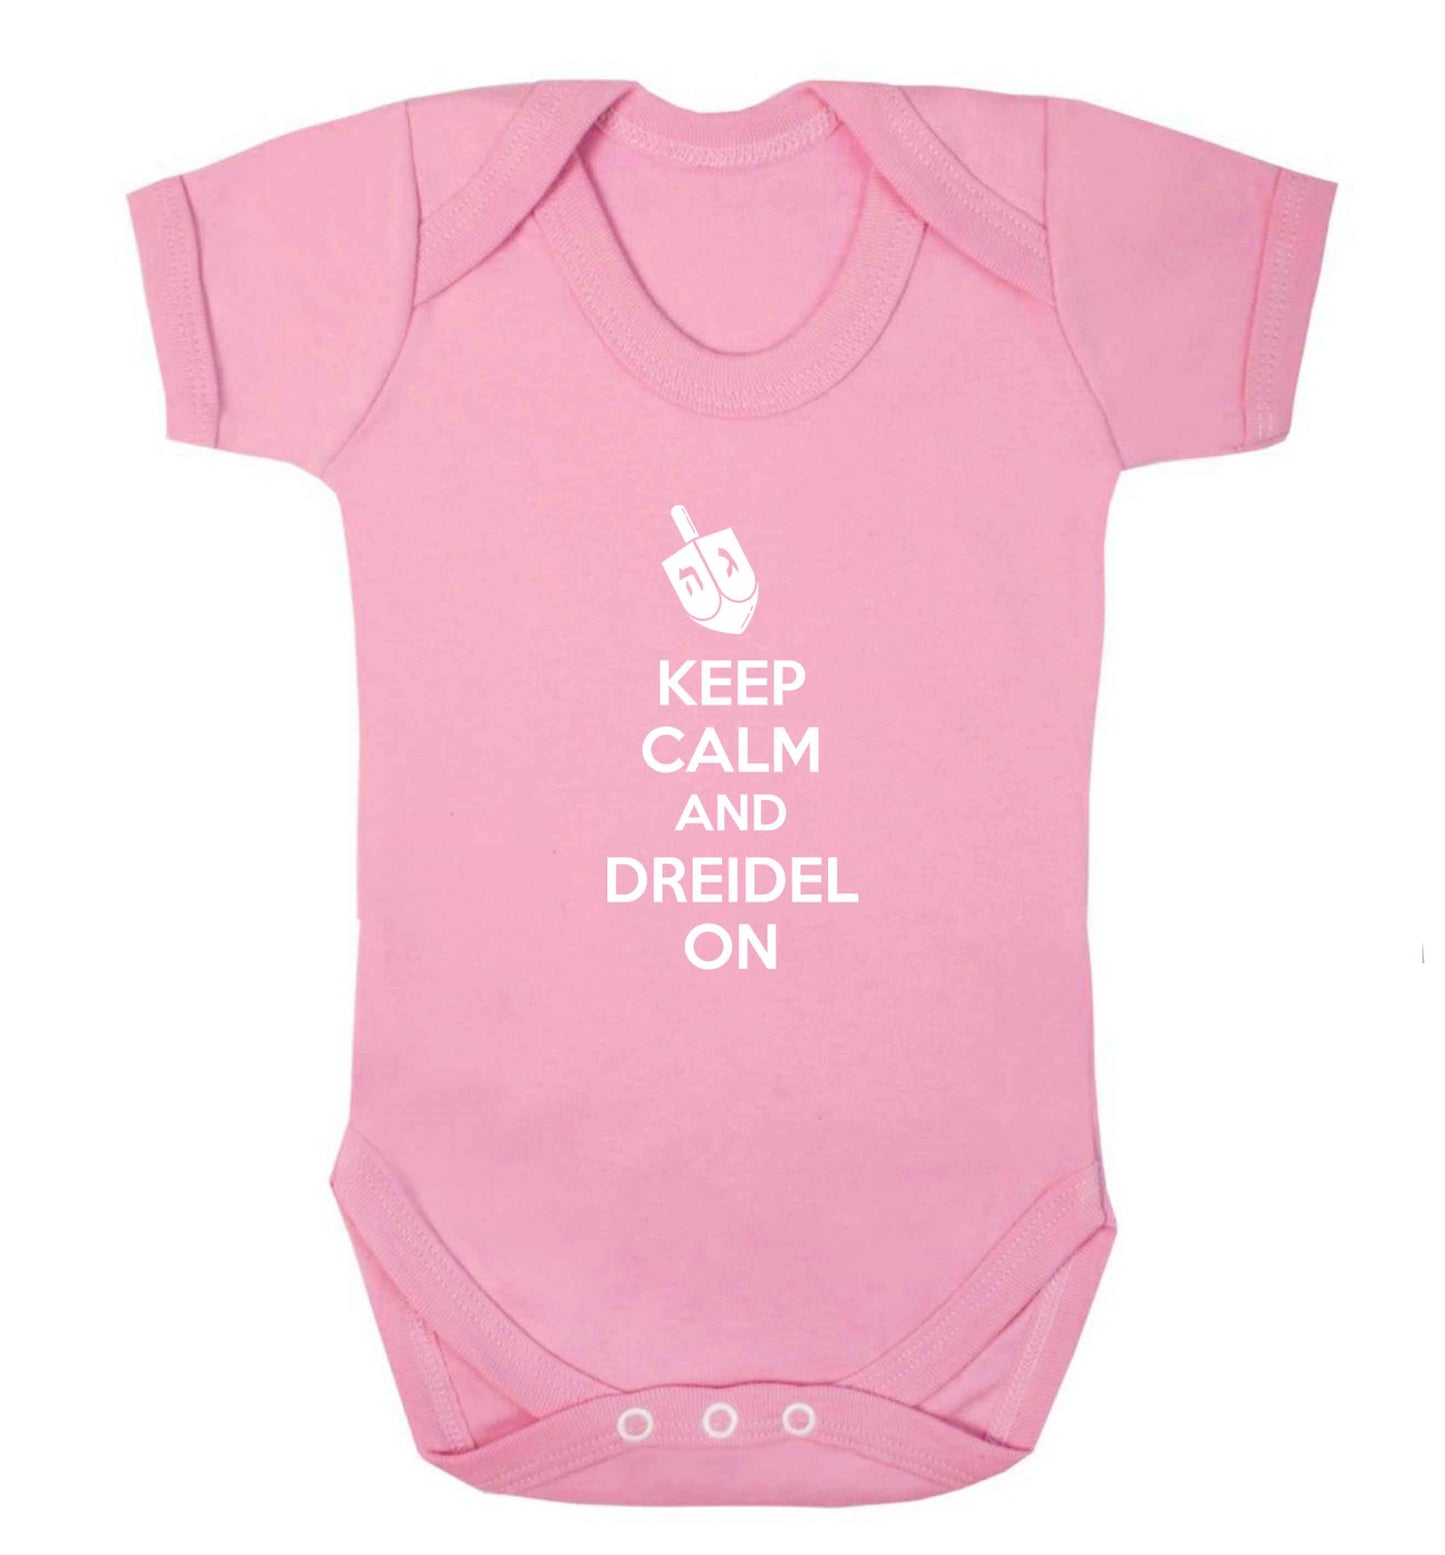 Keep calm and dreidel on baby vest pale pink 18-24 months